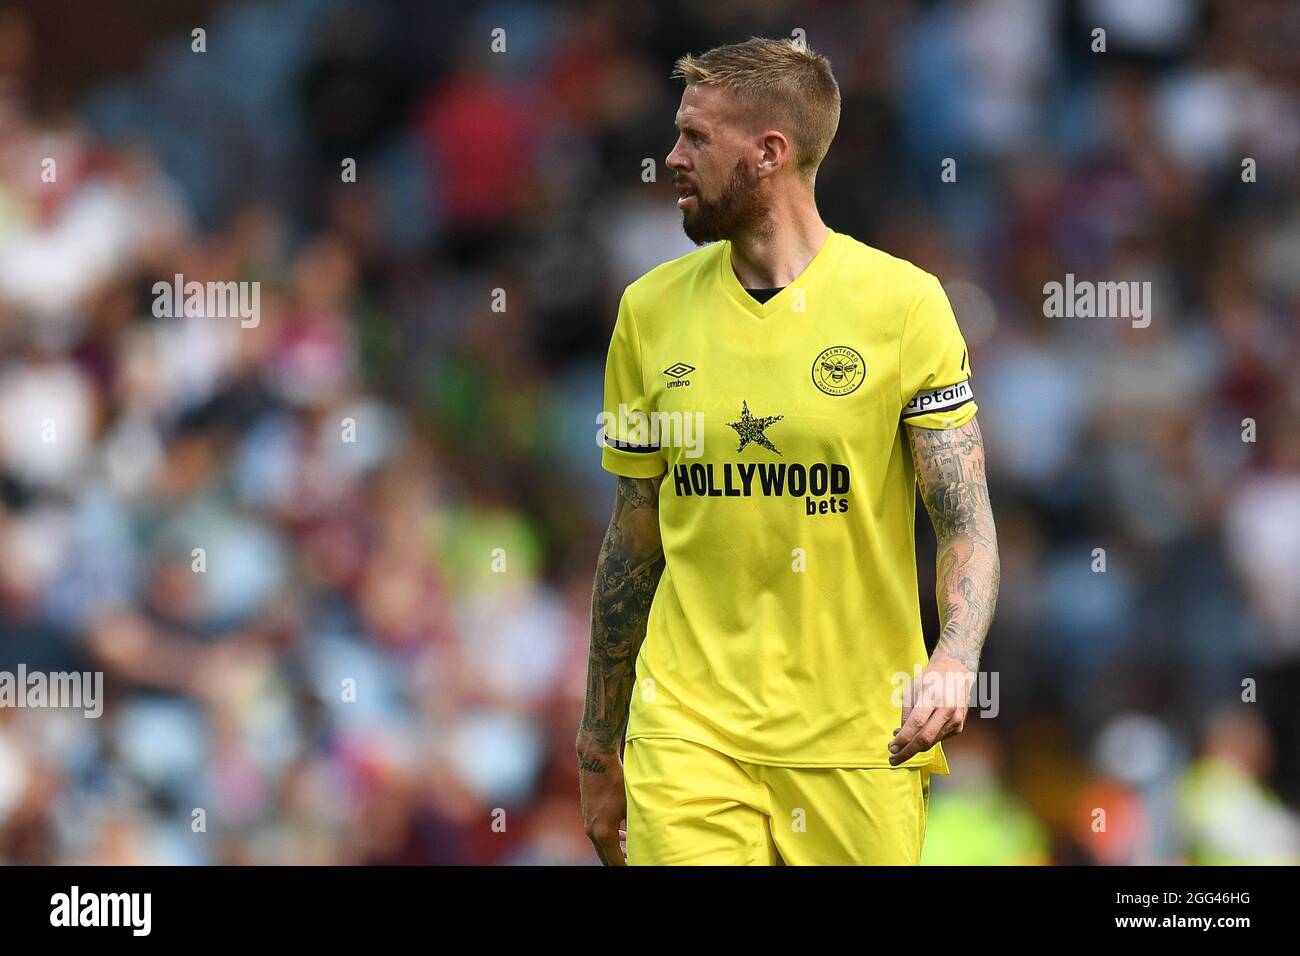 Pontus Jansson #18 of Brentford during the game Stock Photo